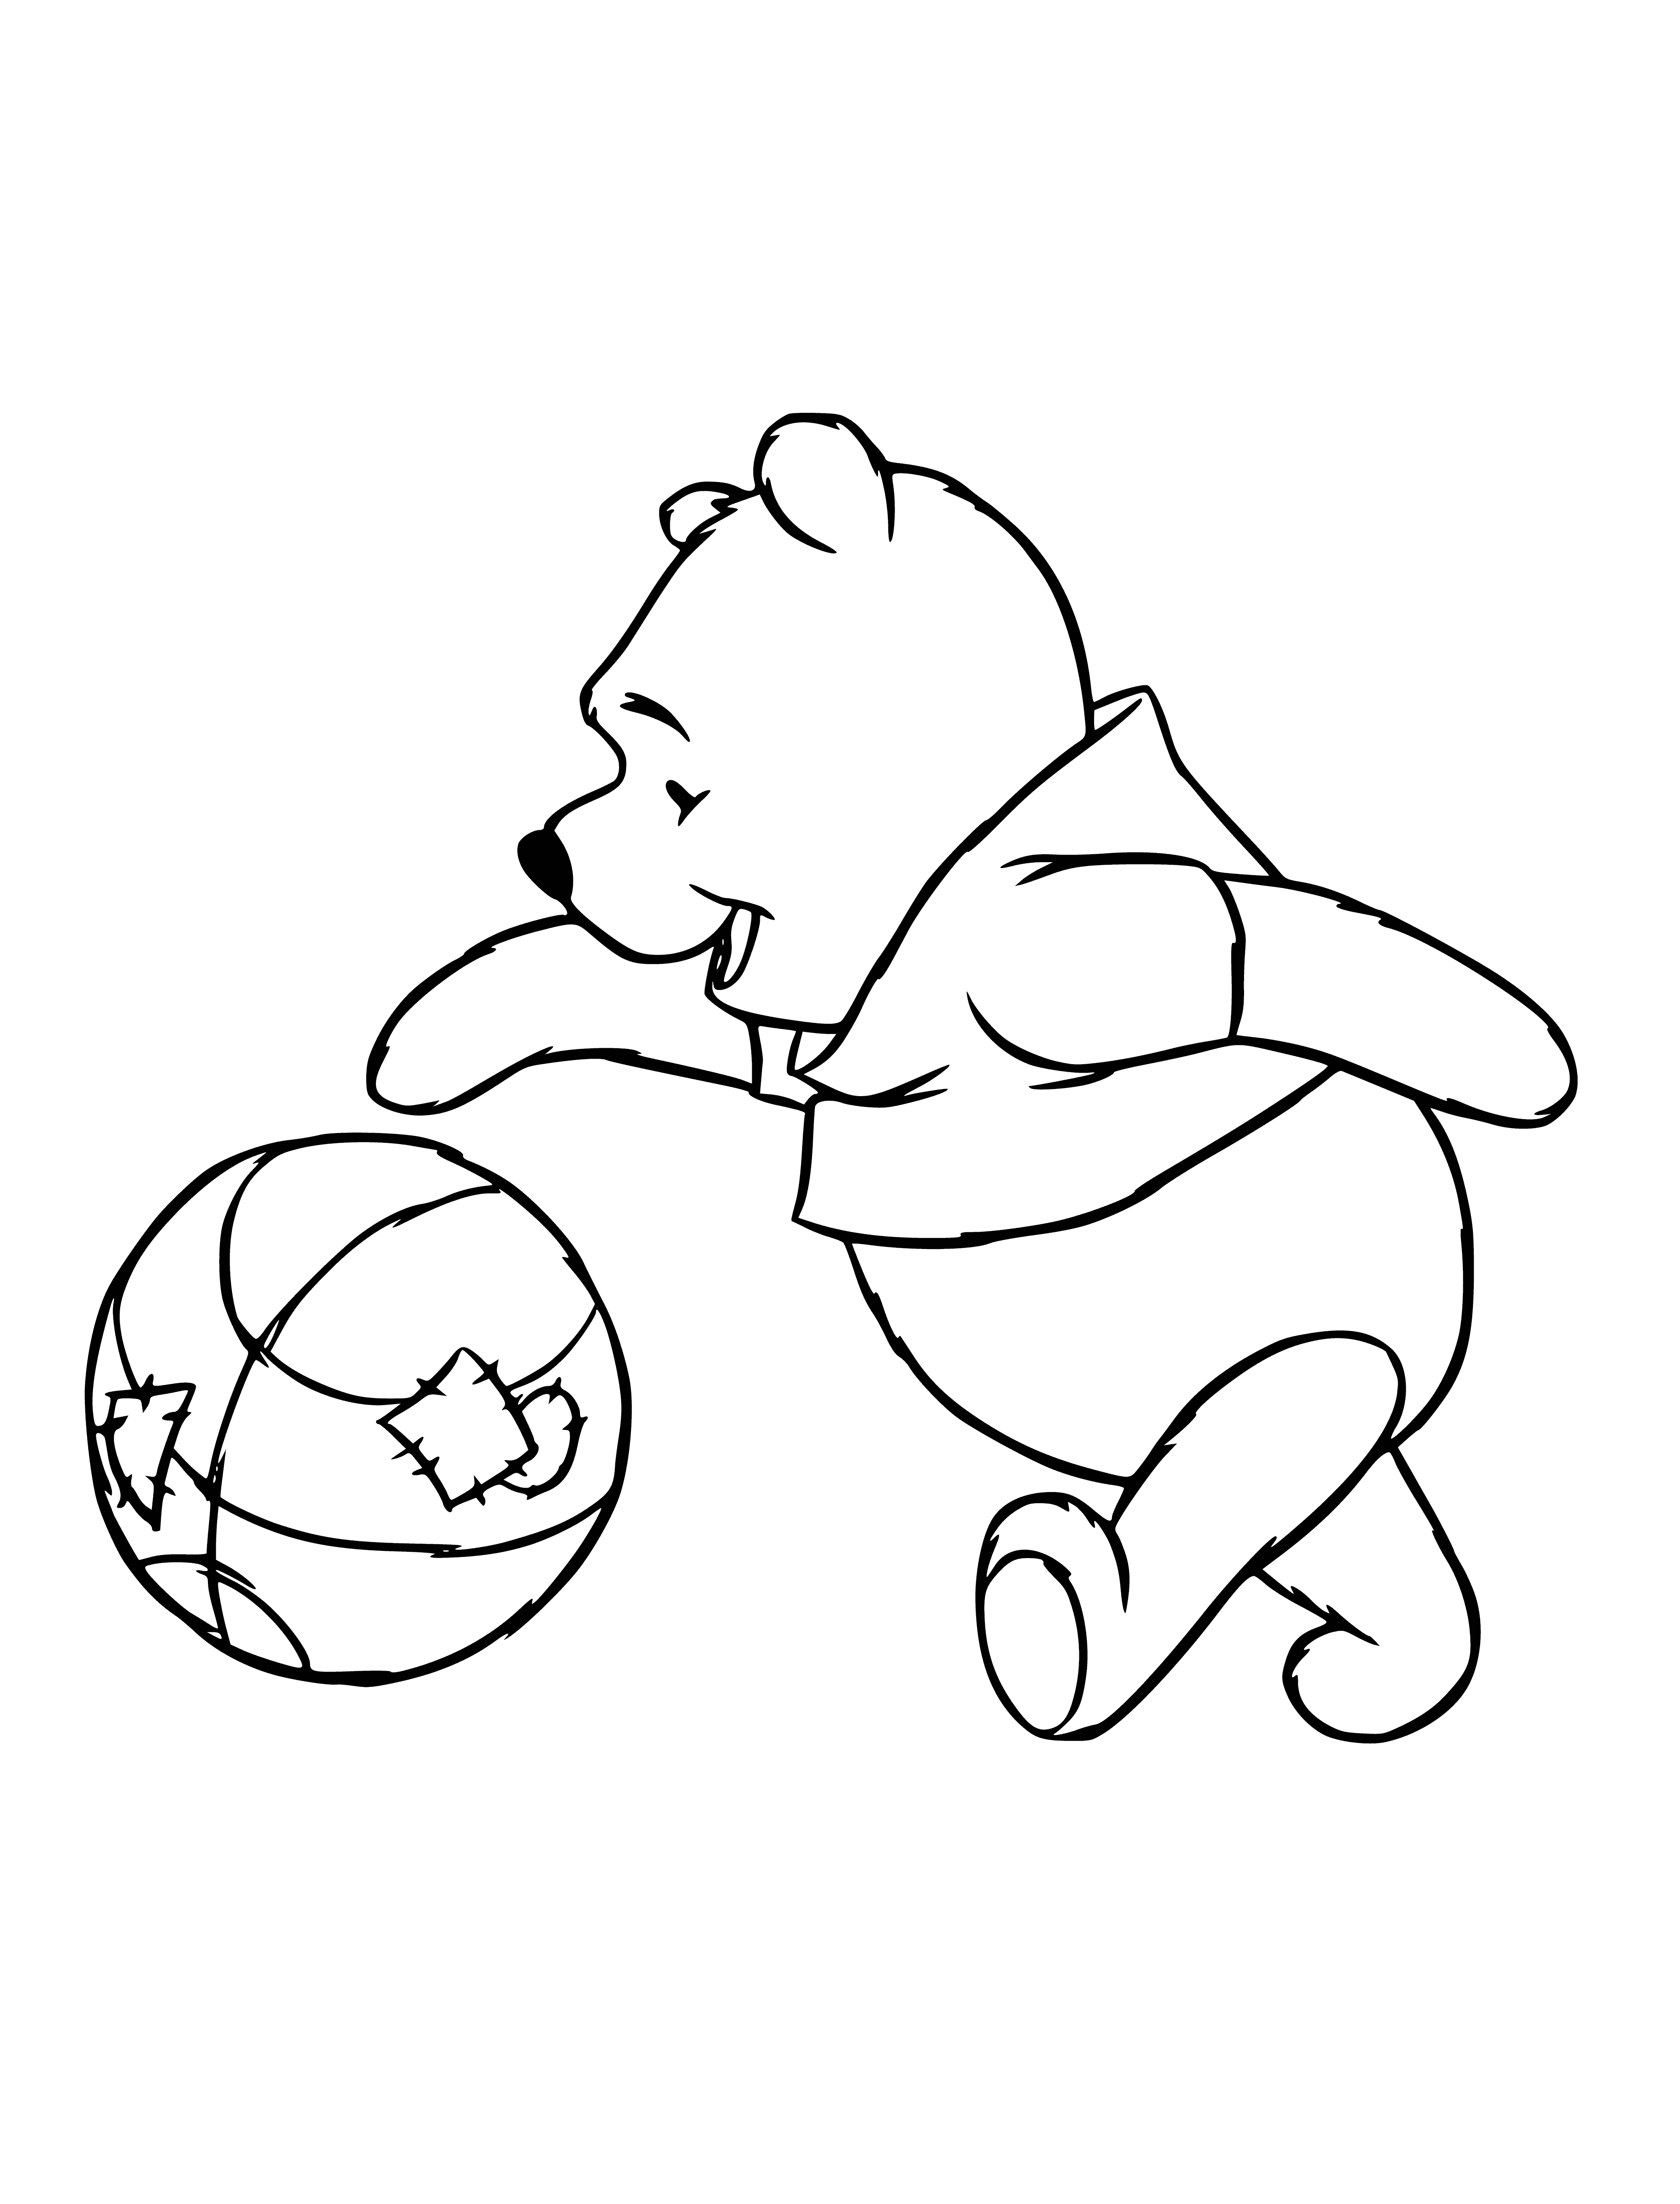 Winnie with the ball coloring page